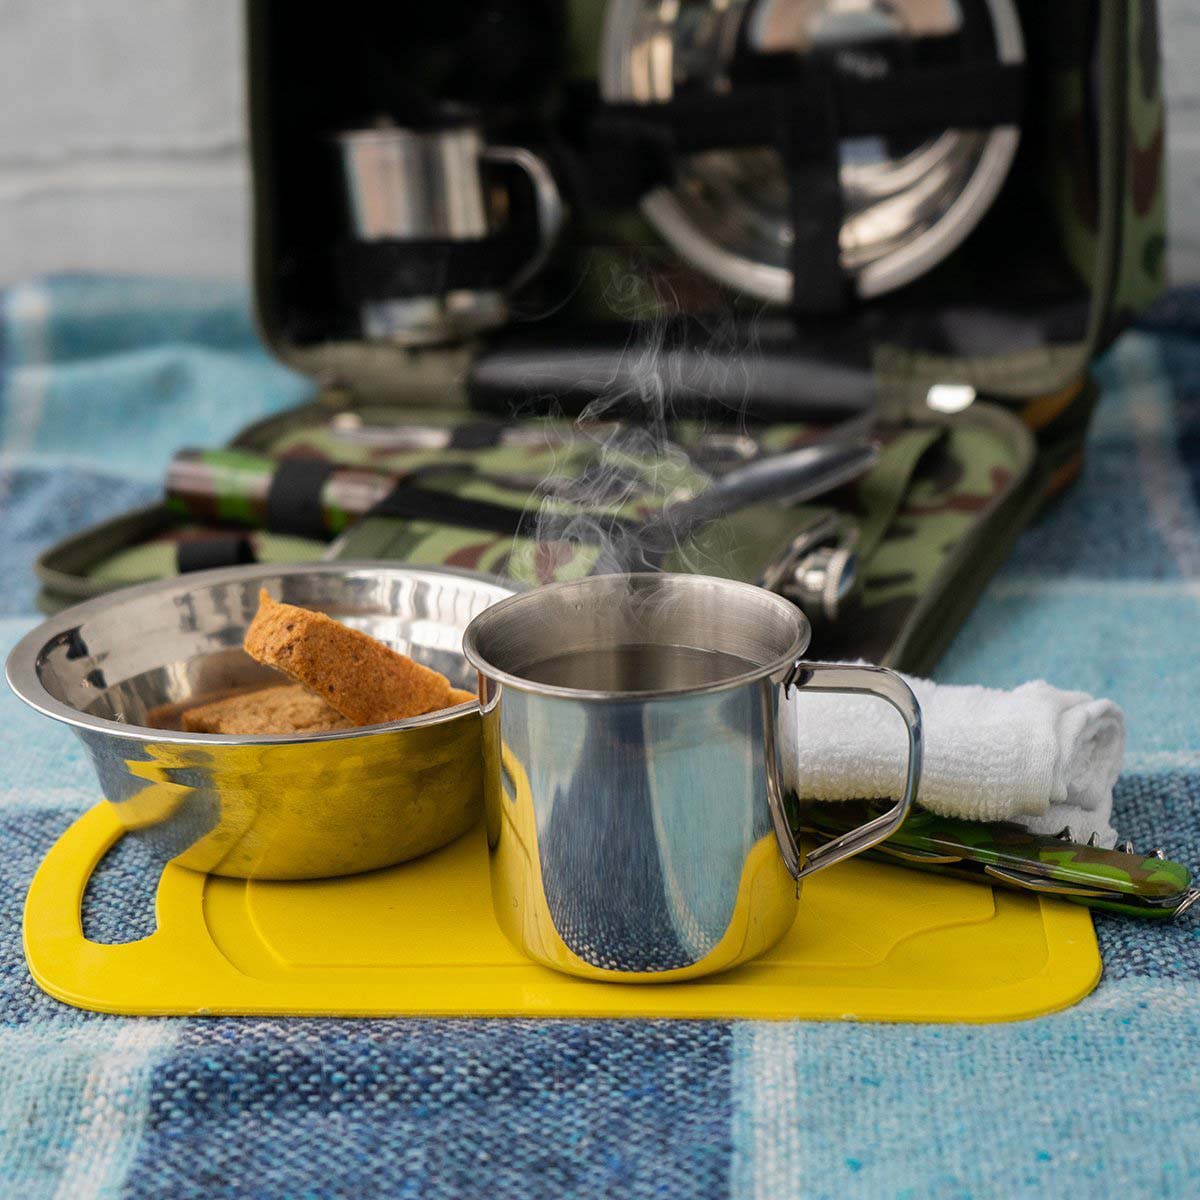 Stainless Steel Picnic Set in Camo Bag for Two Persons